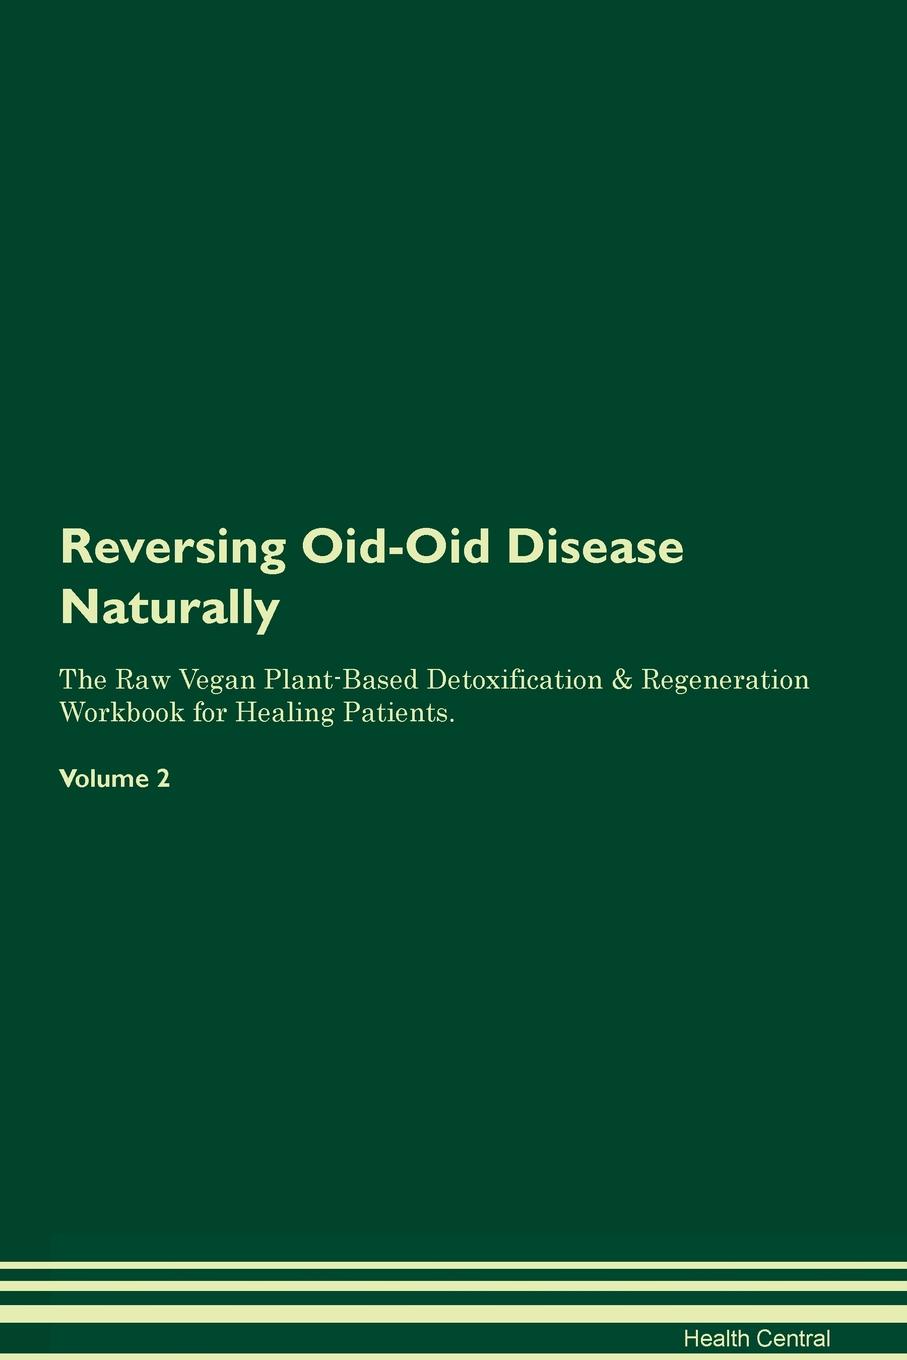 Reversing Oid-Oid Disease Naturally The Raw Vegan Plant-Based Detoxification & Regeneration Workbook for Healing Patients. Volume 2